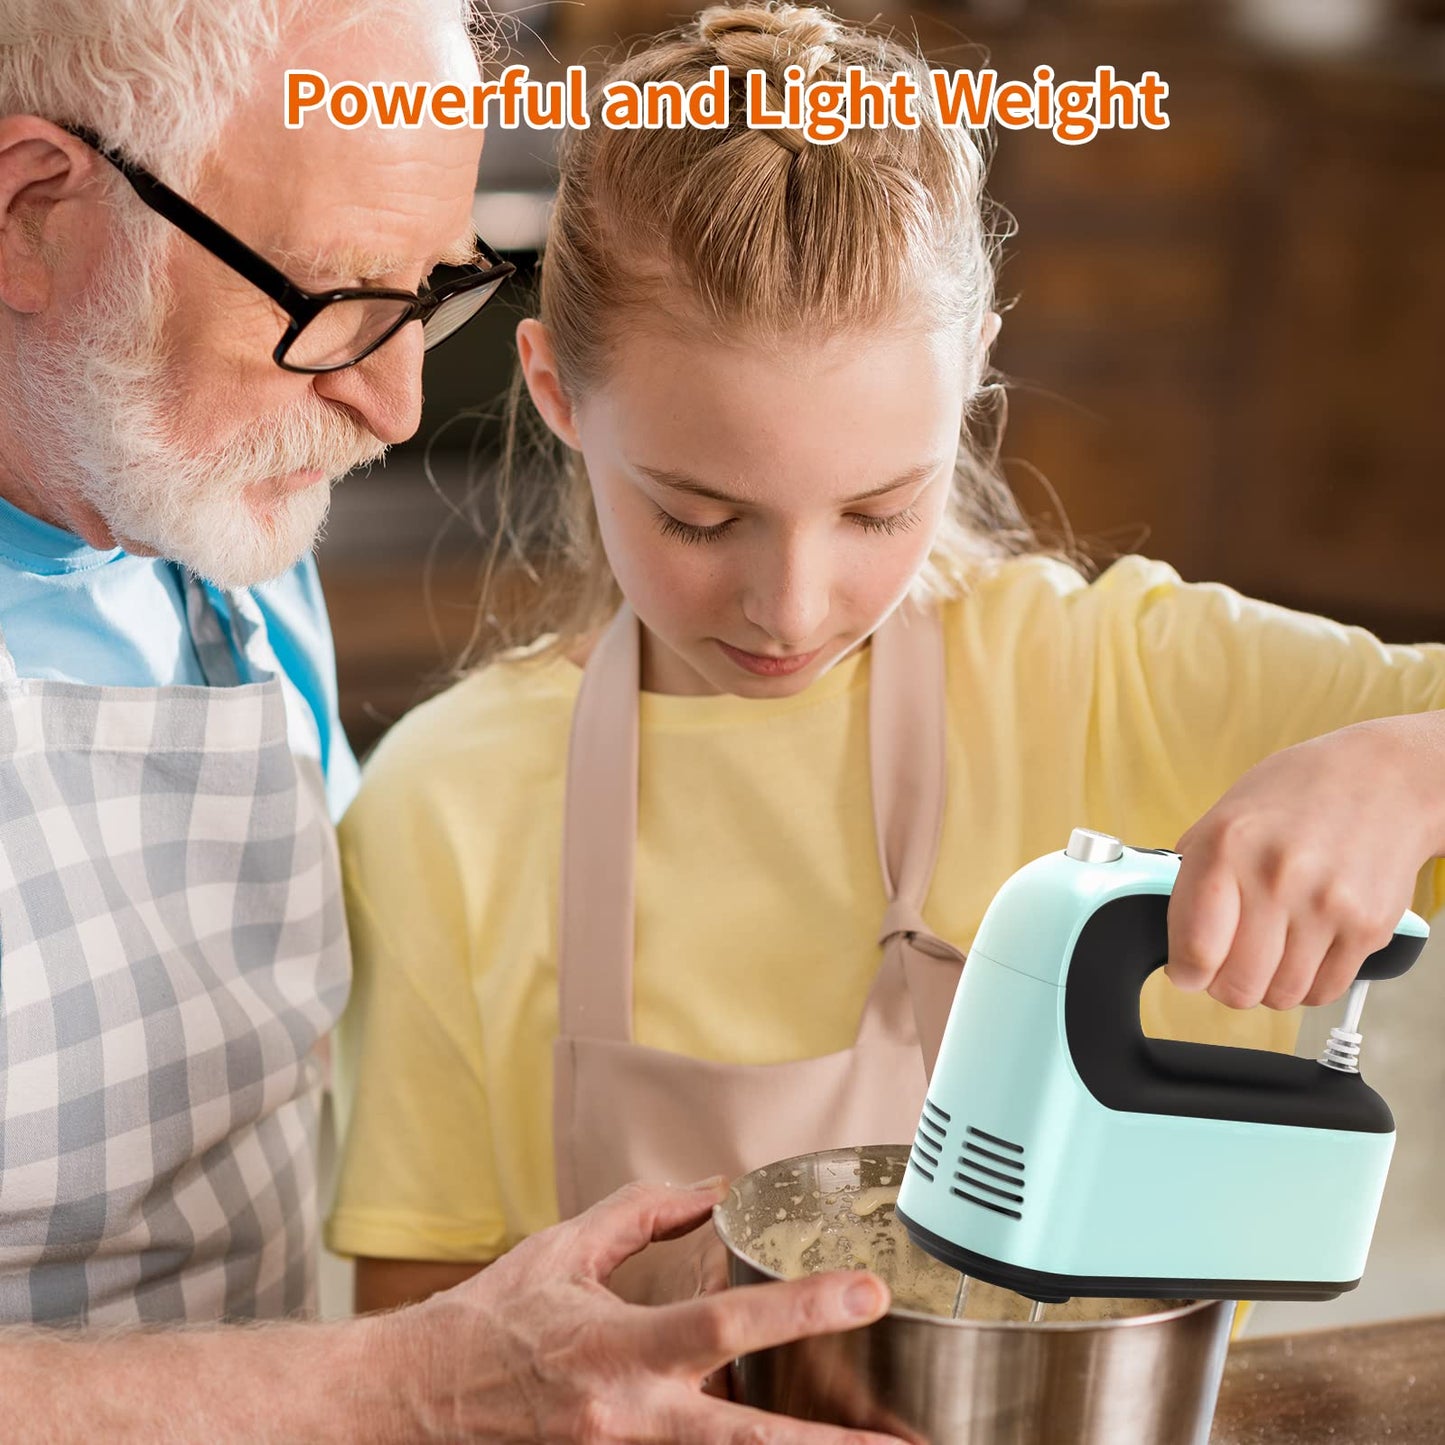 Yomelo 9-Speed Digital Hand Mixer Electric, 400W Powerful DC Motor, Baking Mixer Handheld with Snap-On Storage Case, Touch Button, Turbo Boost, Dough Hooks, Whisk (Ice Blue)